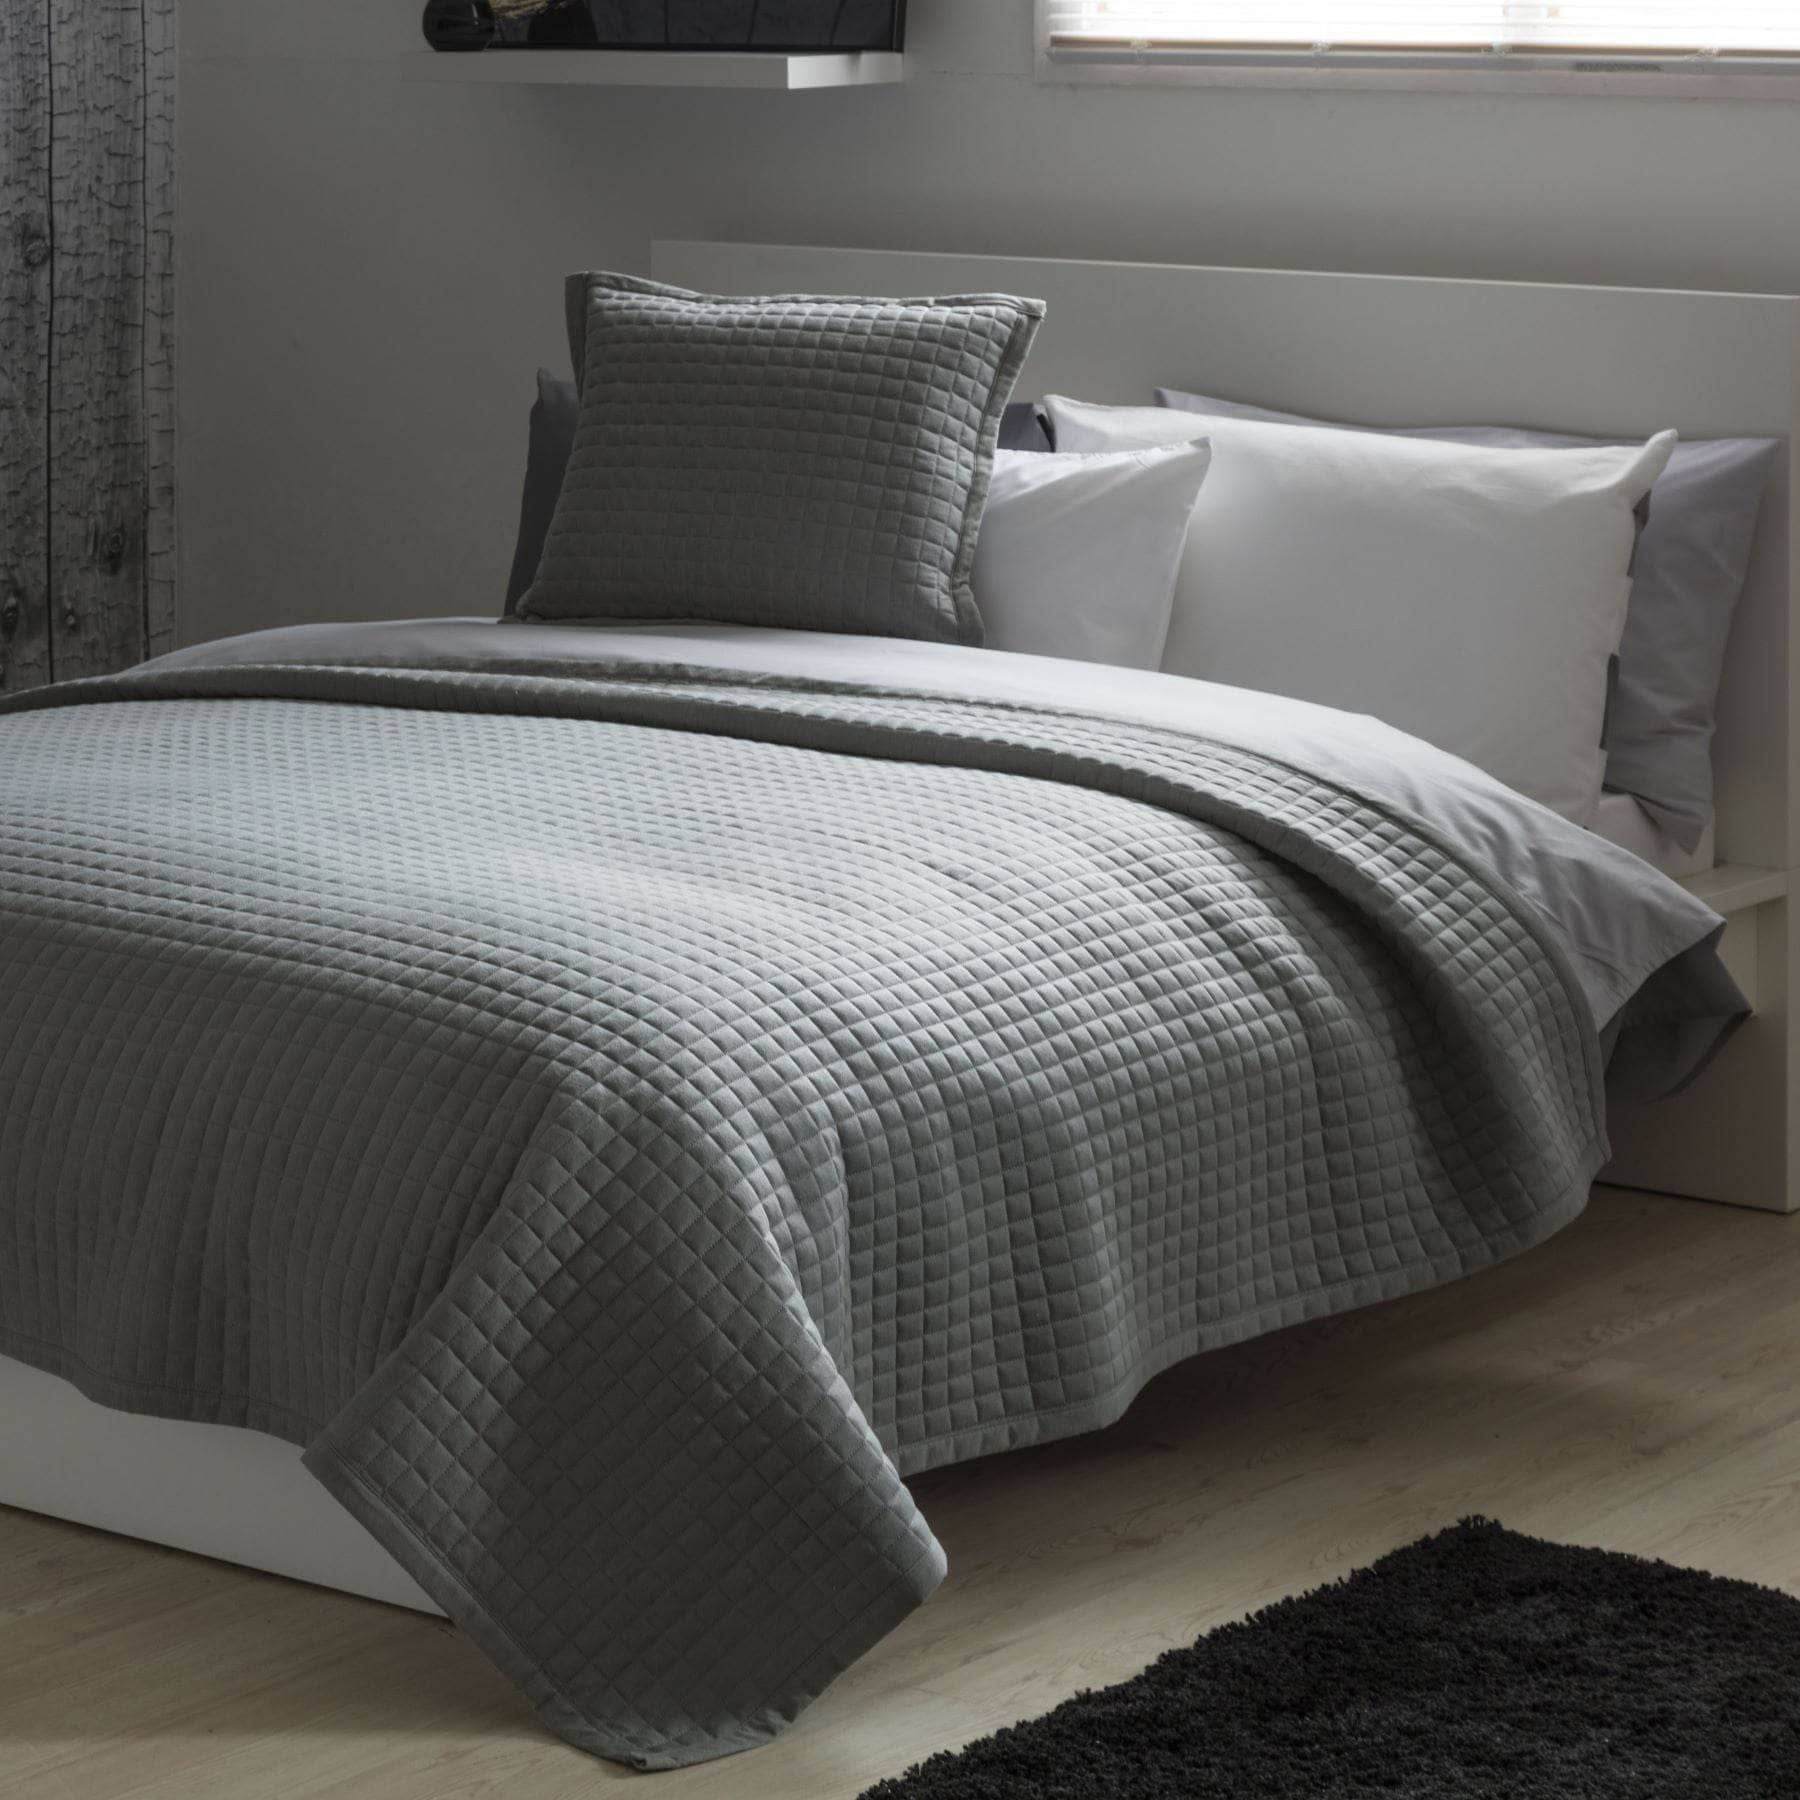 Homeware  -  Crompton Quilted Cushion - Grey  -  60009960